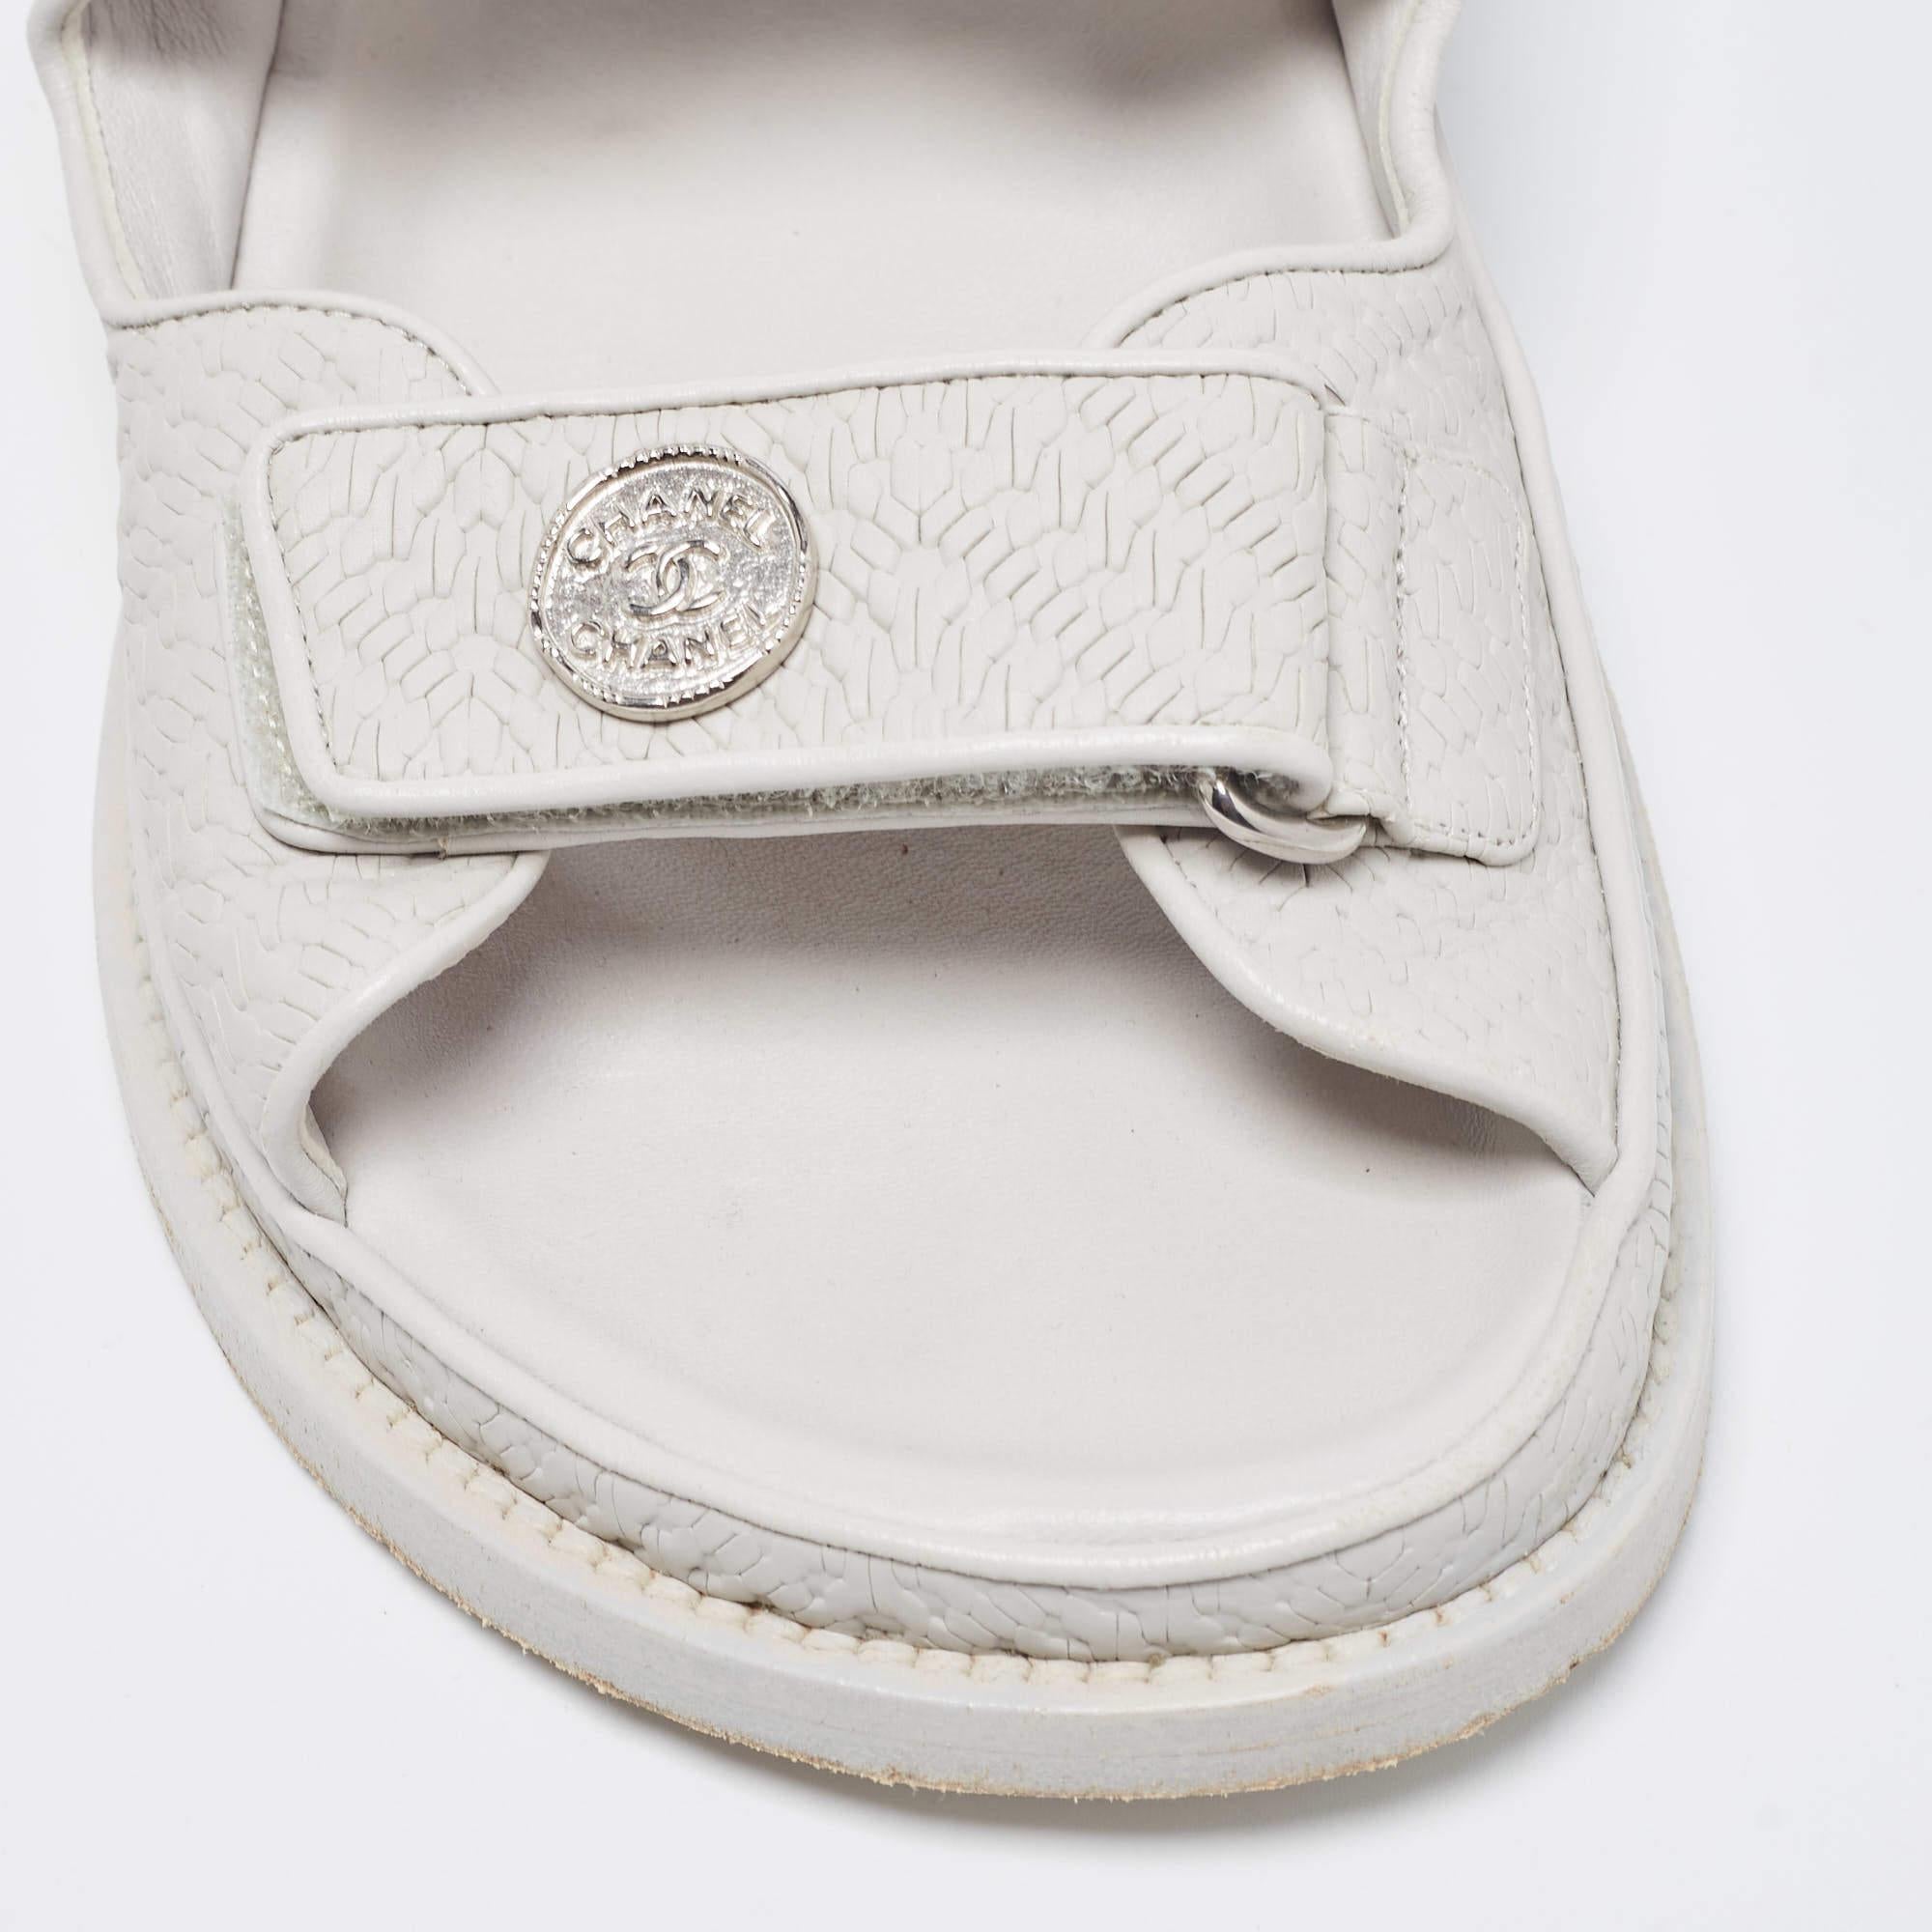 Chanel Light Grey Textured Leather Dad Sandals Size 39 2